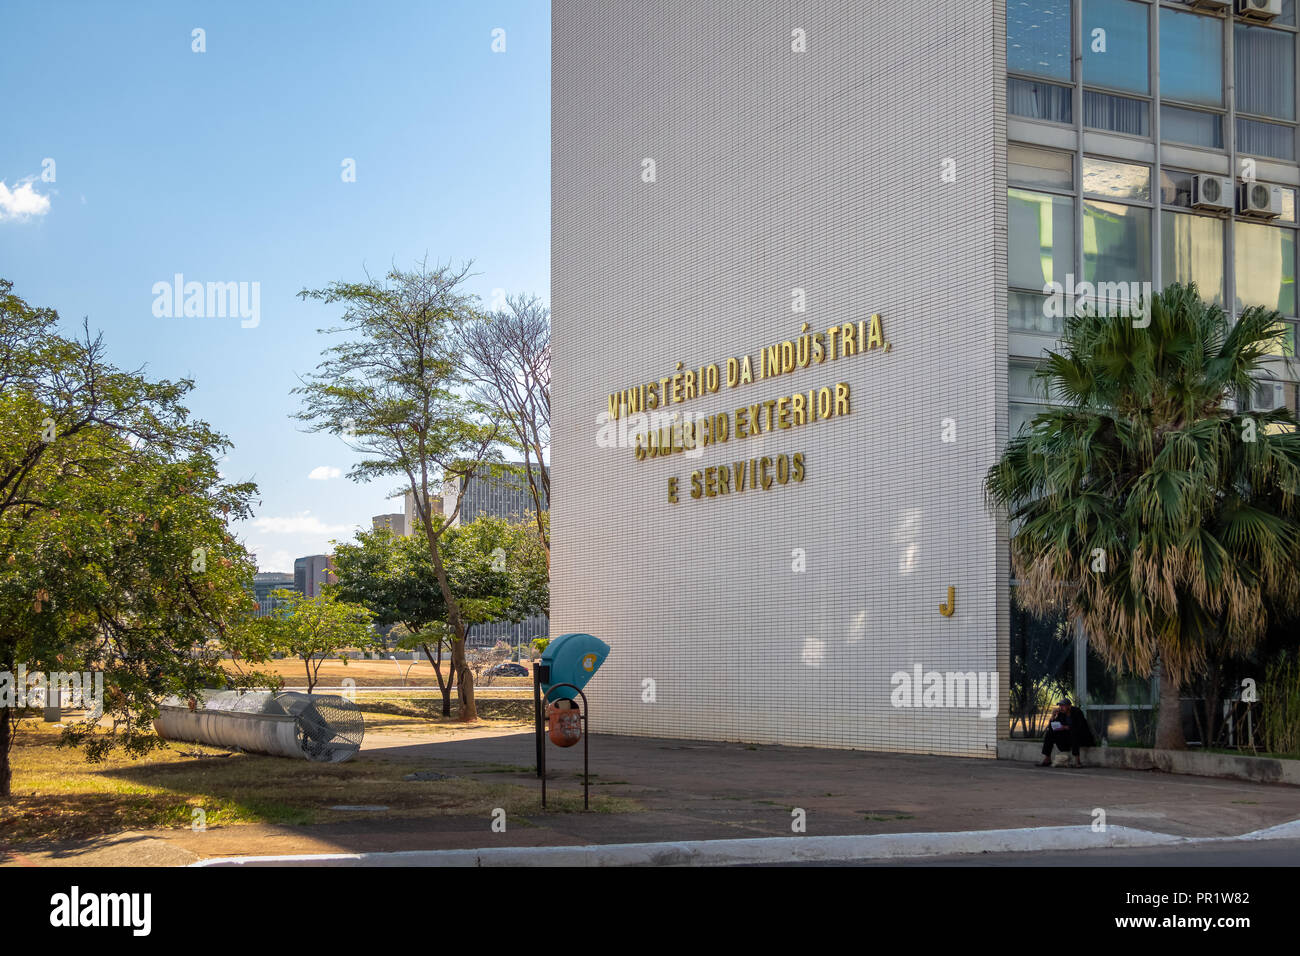 Ministry of Industry, Trade and Services - Brasilia, Distrito Federal, Brazil Stock Photo